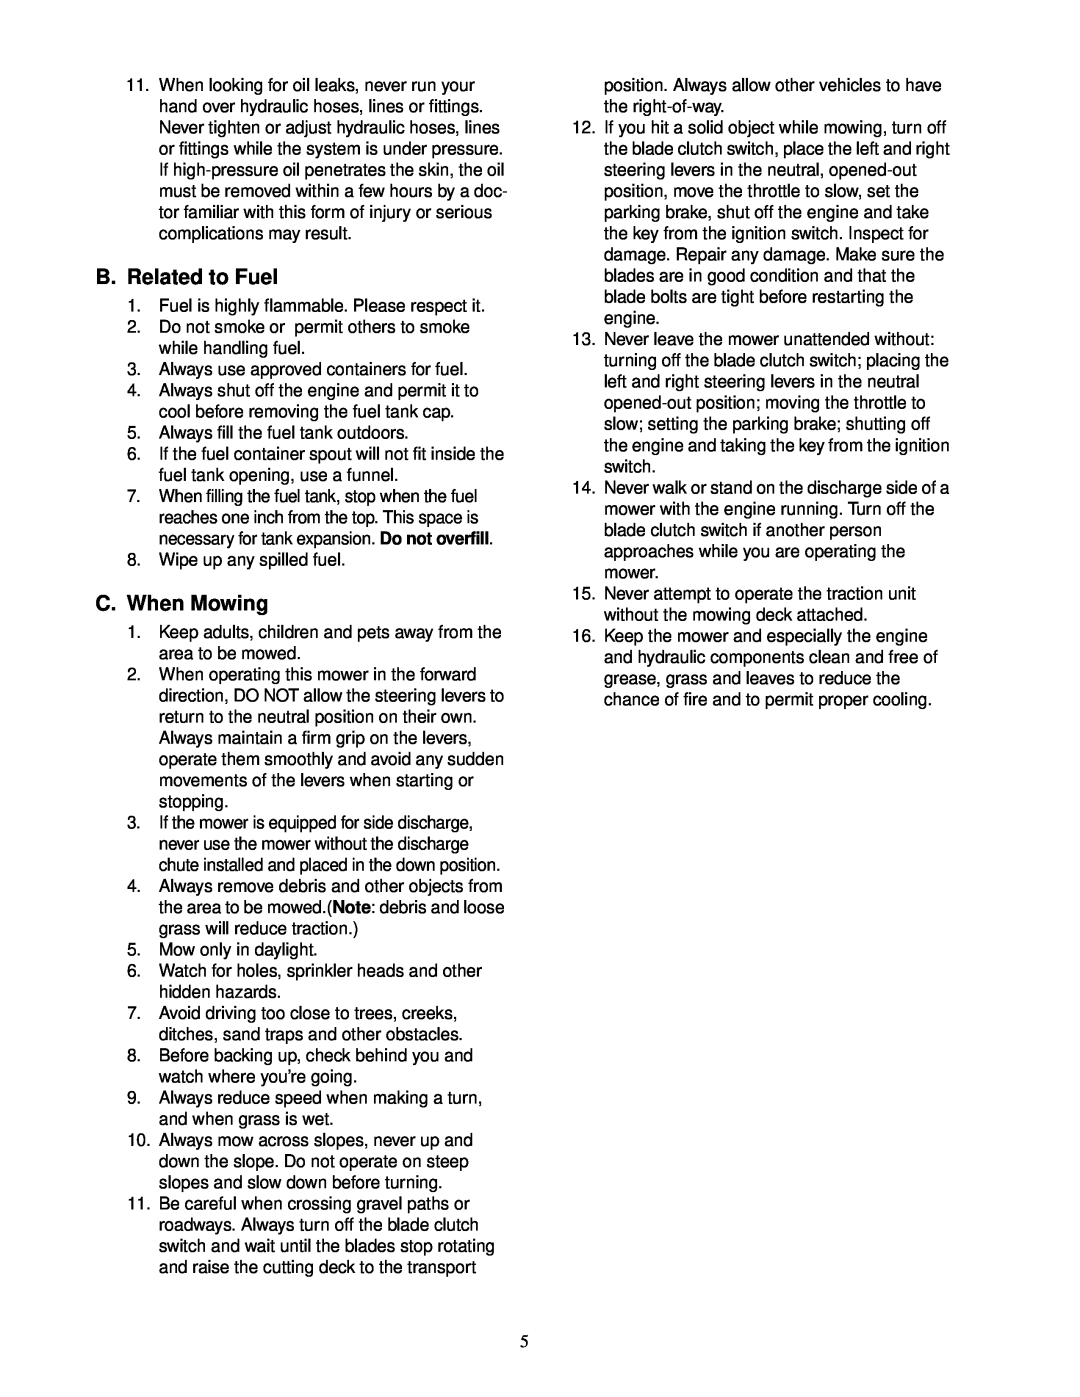 MTD 18HP service manual B. Related to Fuel, C. When Mowing 